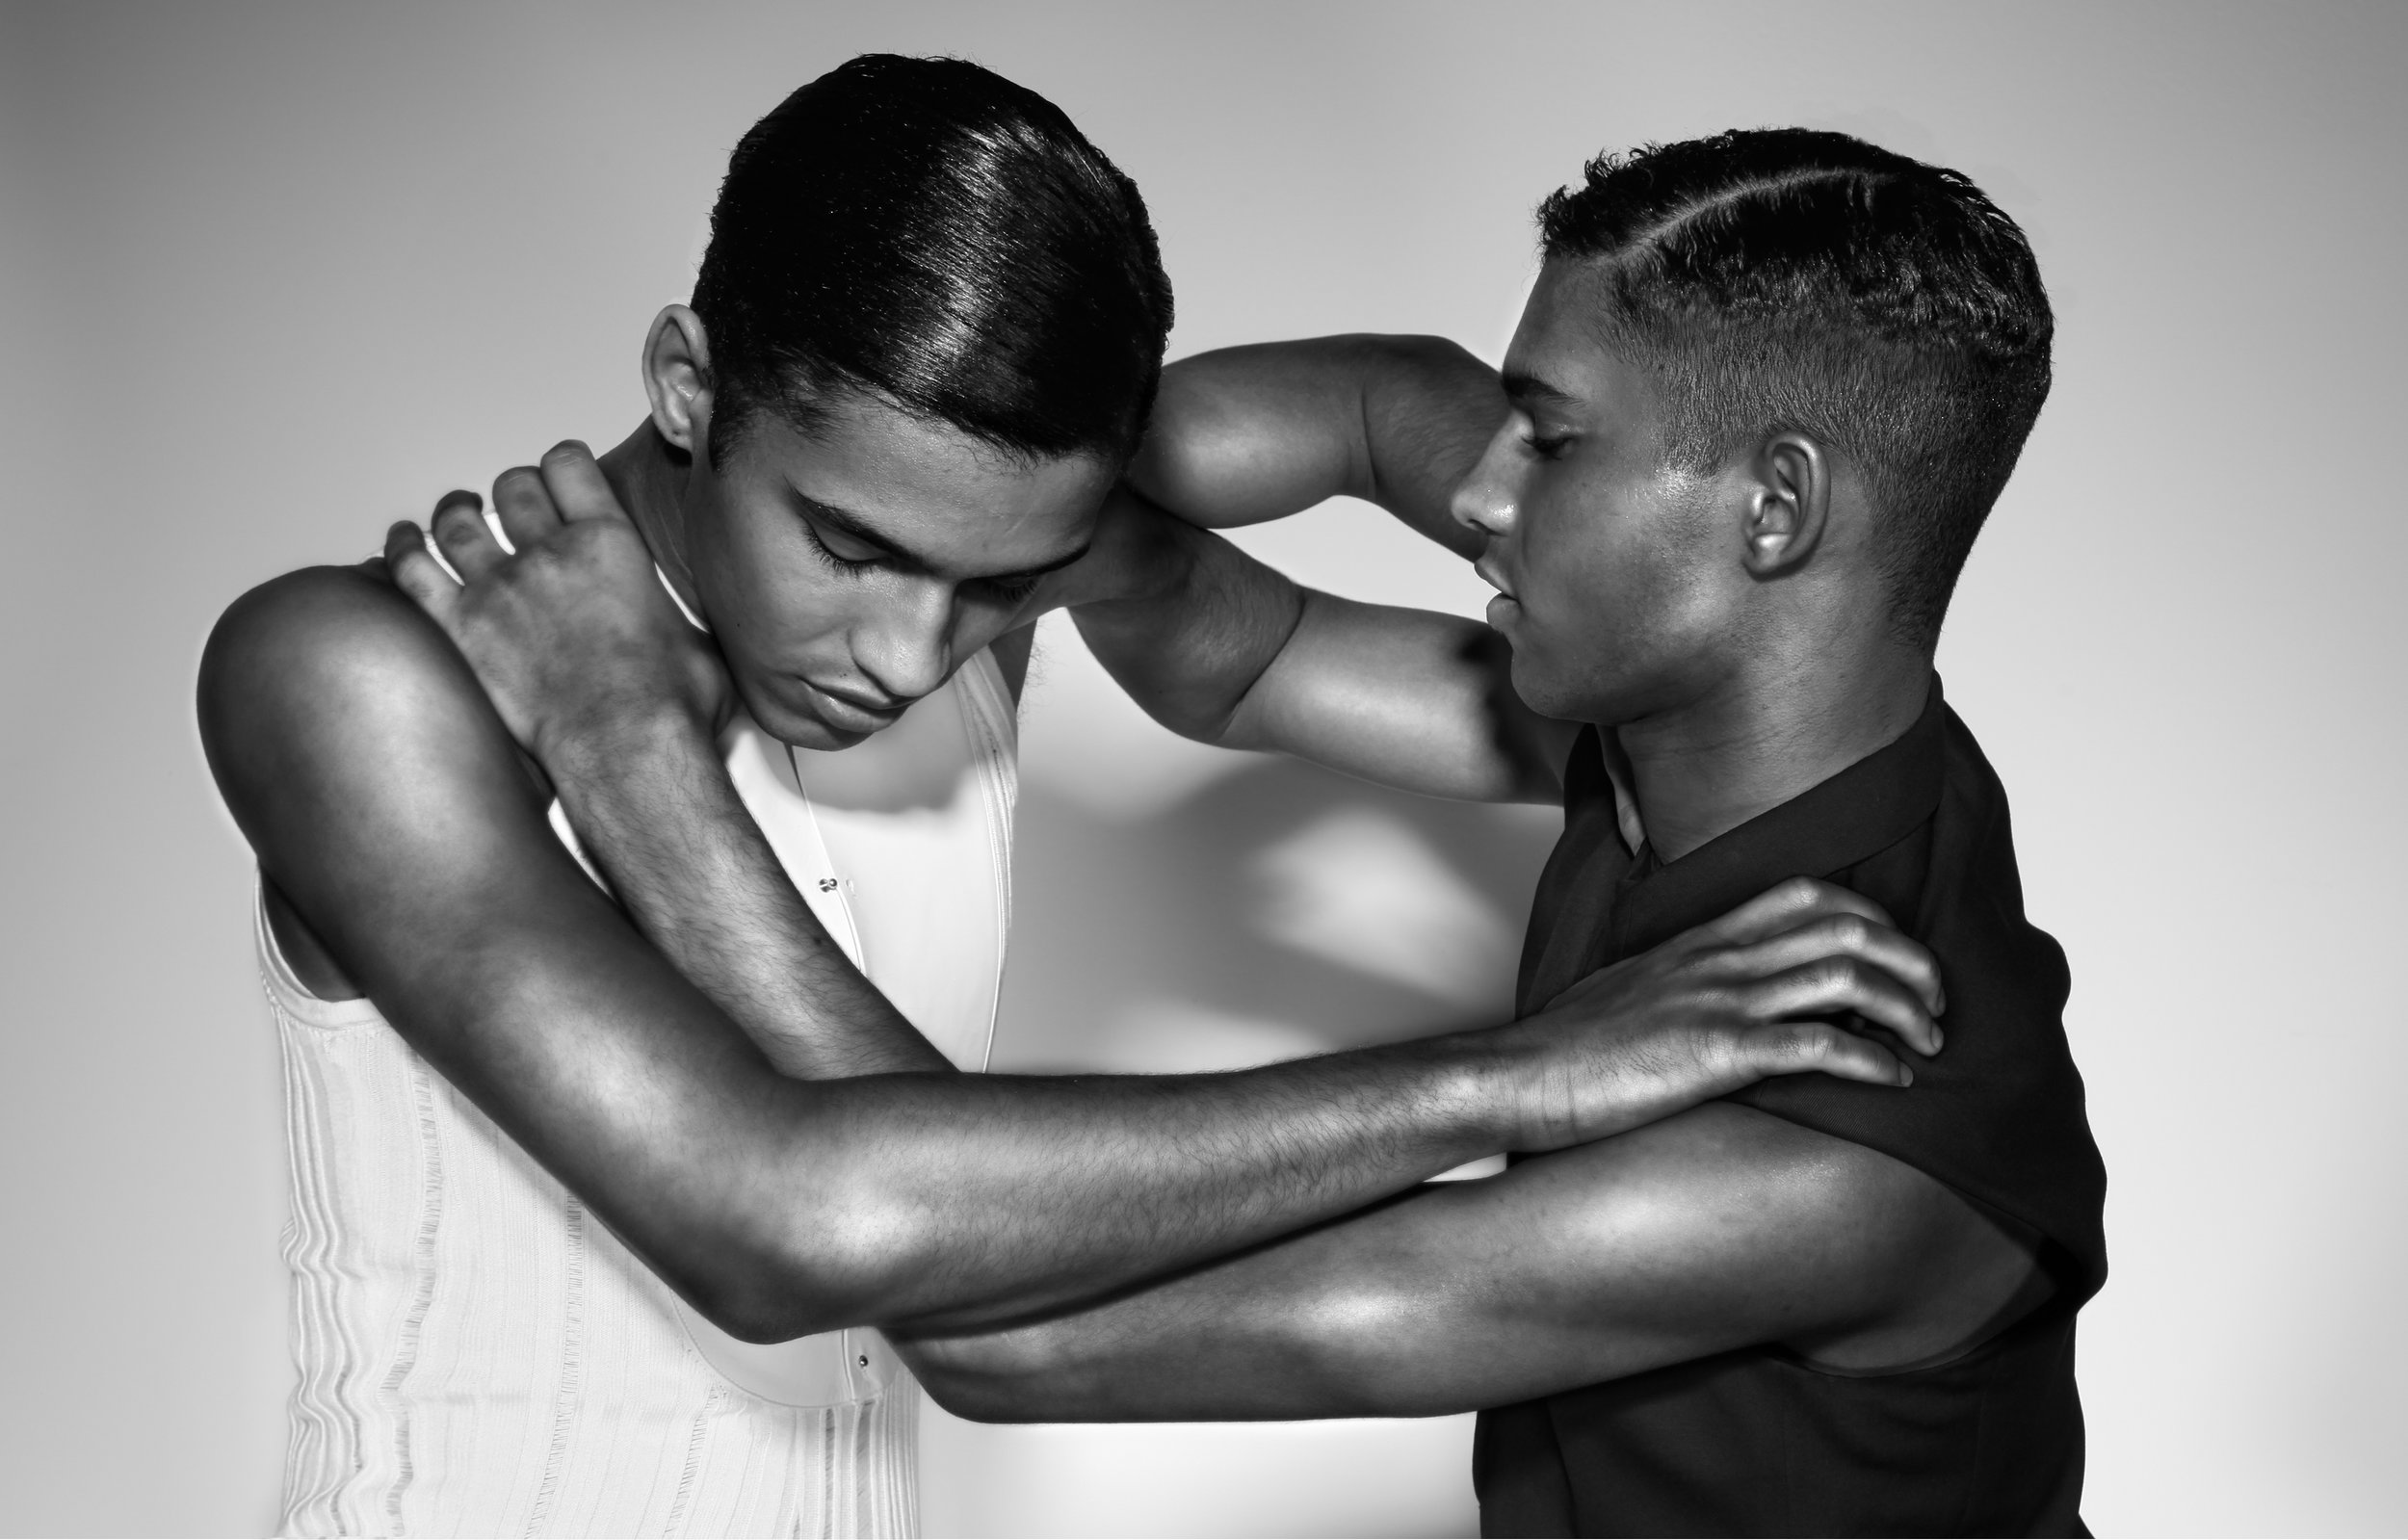   Hector and Jan Carlos Diaz by Anthony Goicolea for L’Officiel USA  